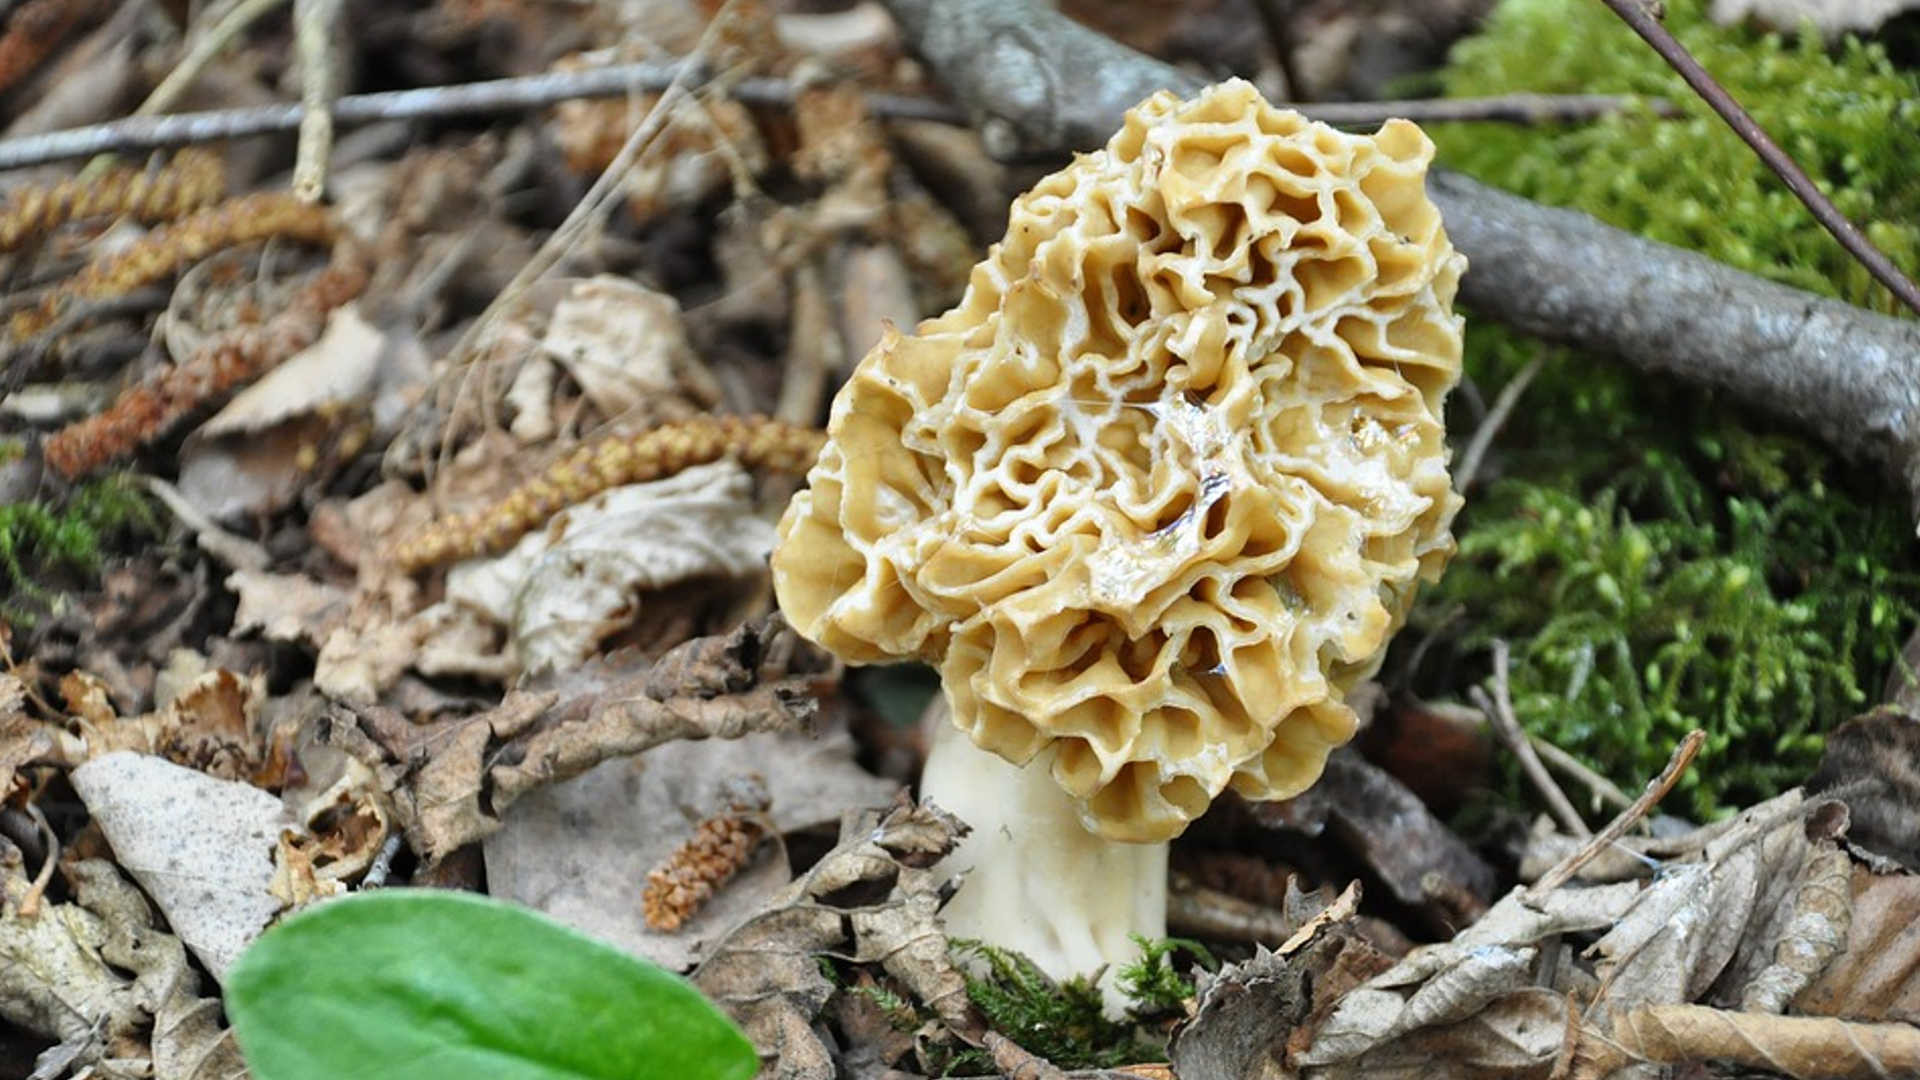 1920x1080 Now that it's spring, a particular species of edible mushroom is beginning  to appear across the country, including southern Oregon.